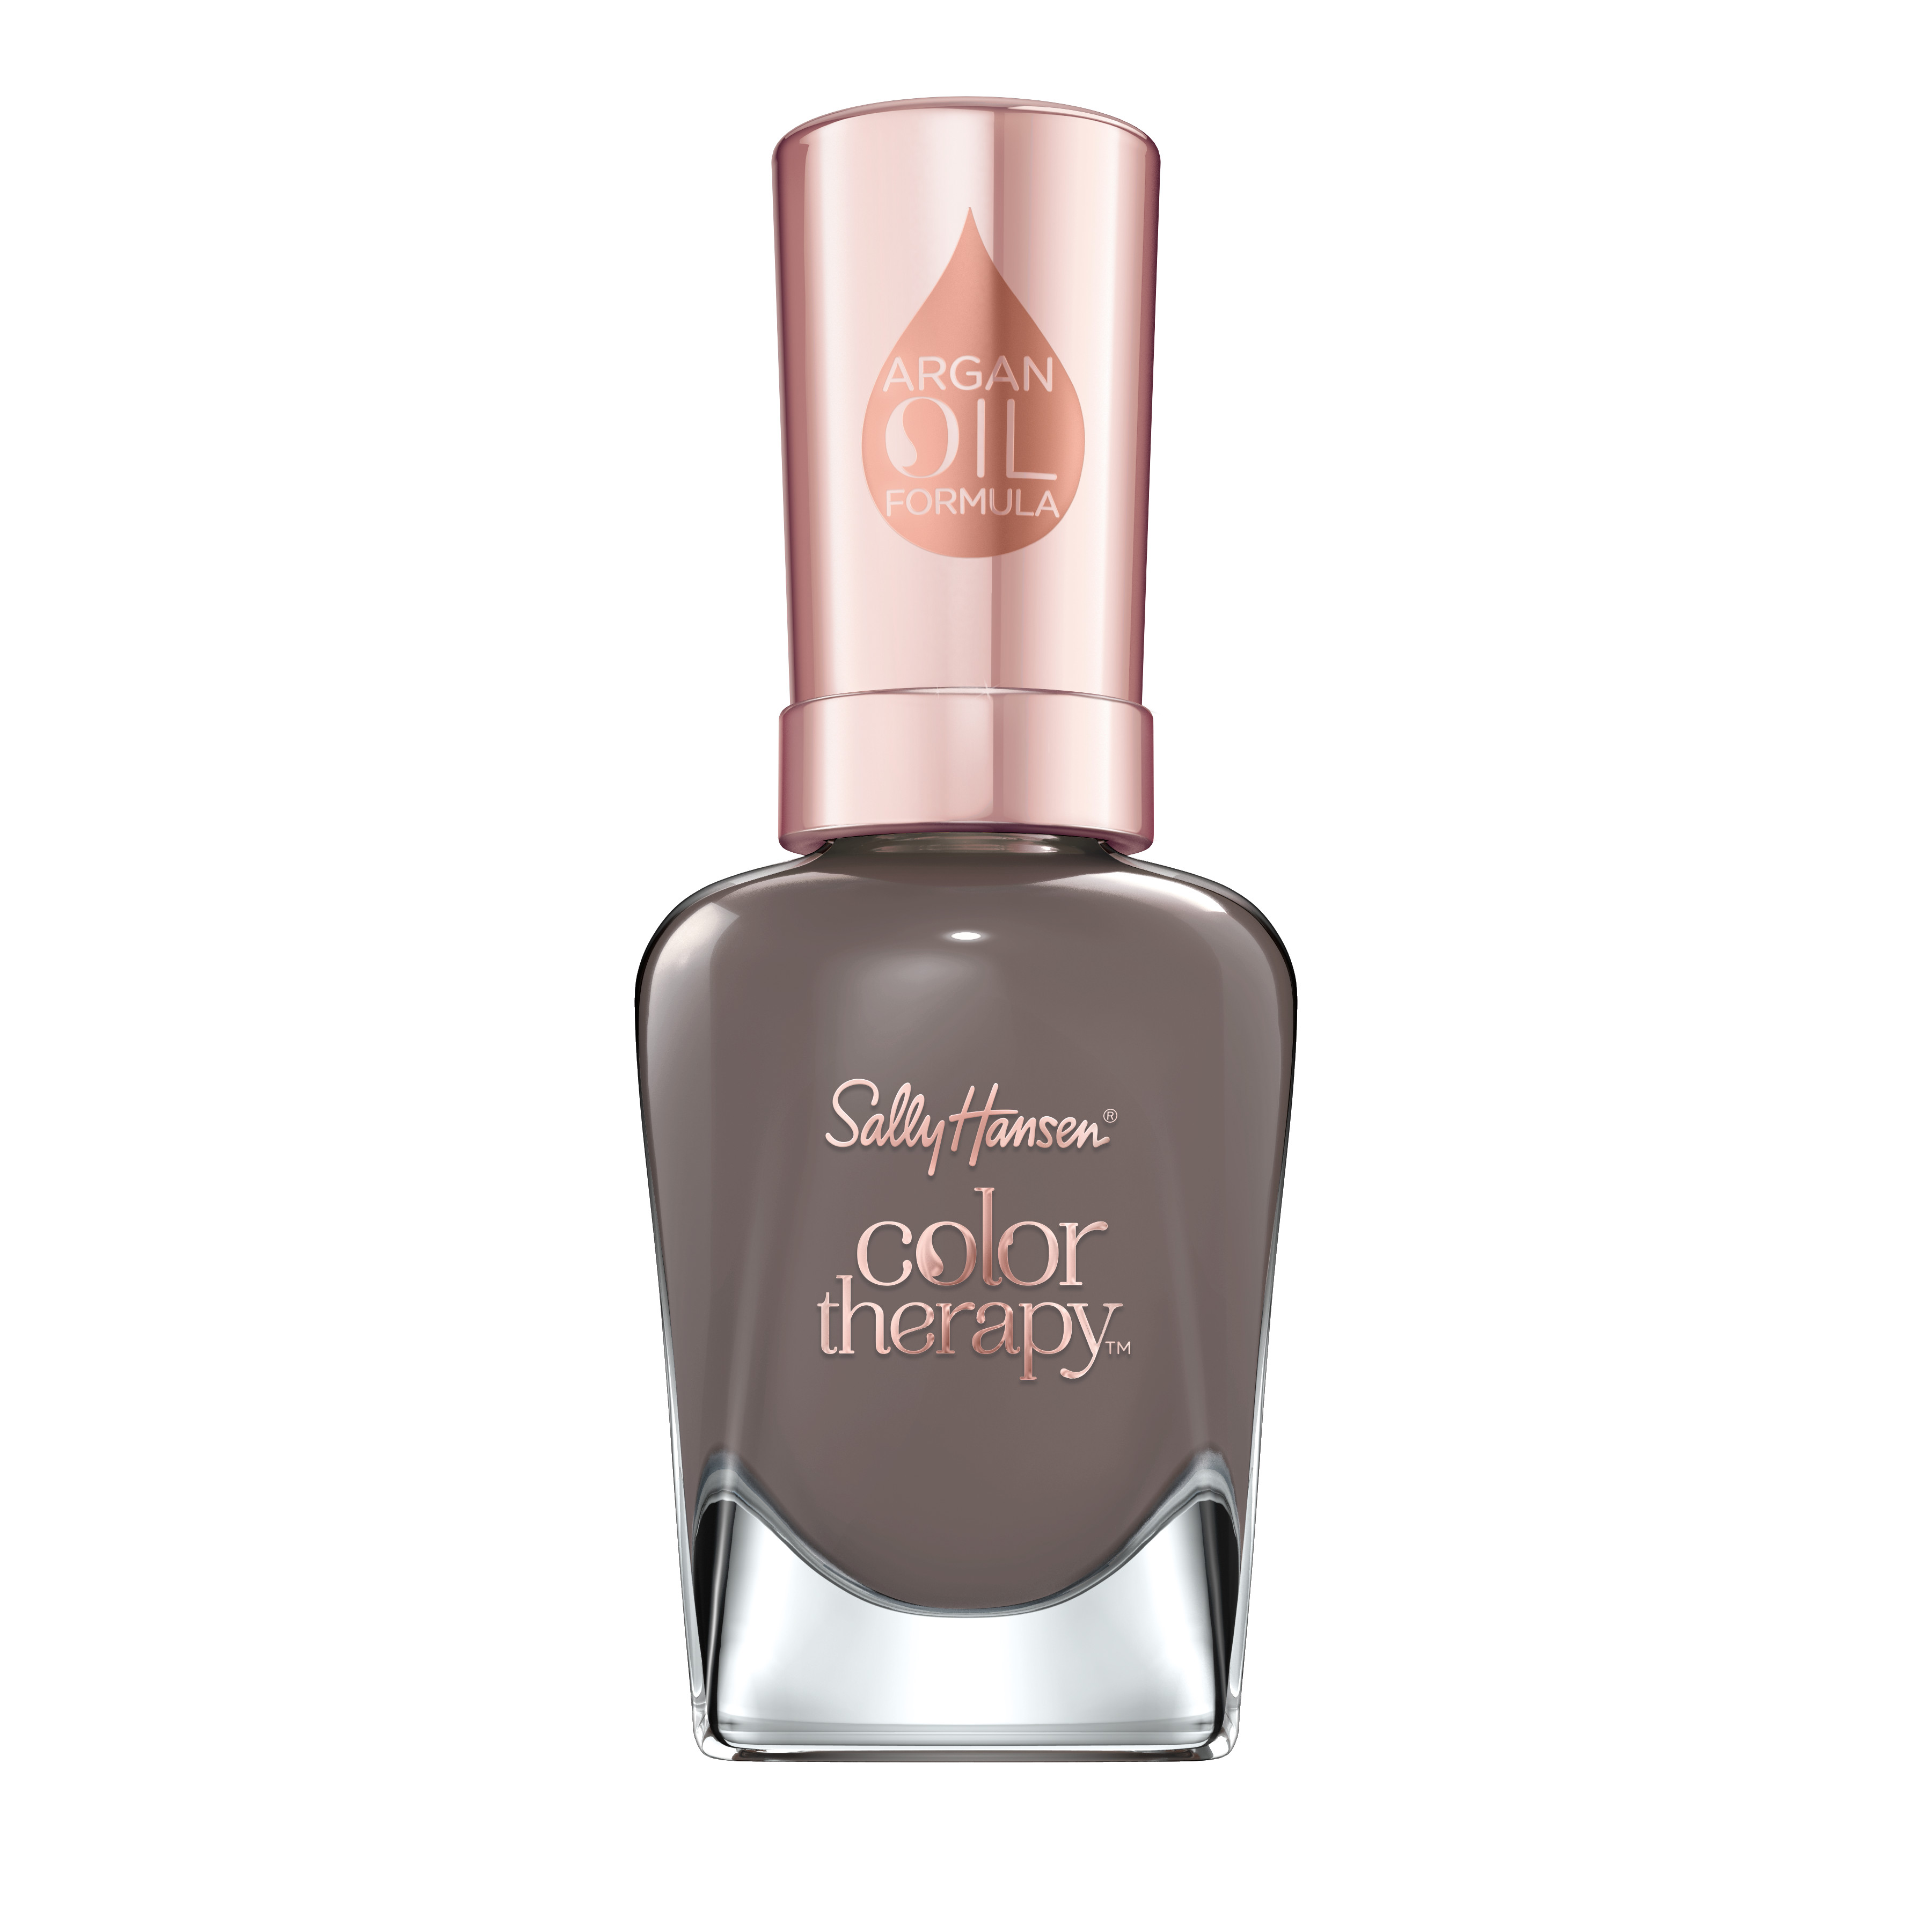 Sally Hansen Color Therapy Nail Color, Slate Escape, 0.5 oz, Color Nail Polish, Nail Polish, Nail Polish Colors, Restorative, Argan Oil Formula, Instantly Moisturizes - image 1 of 13